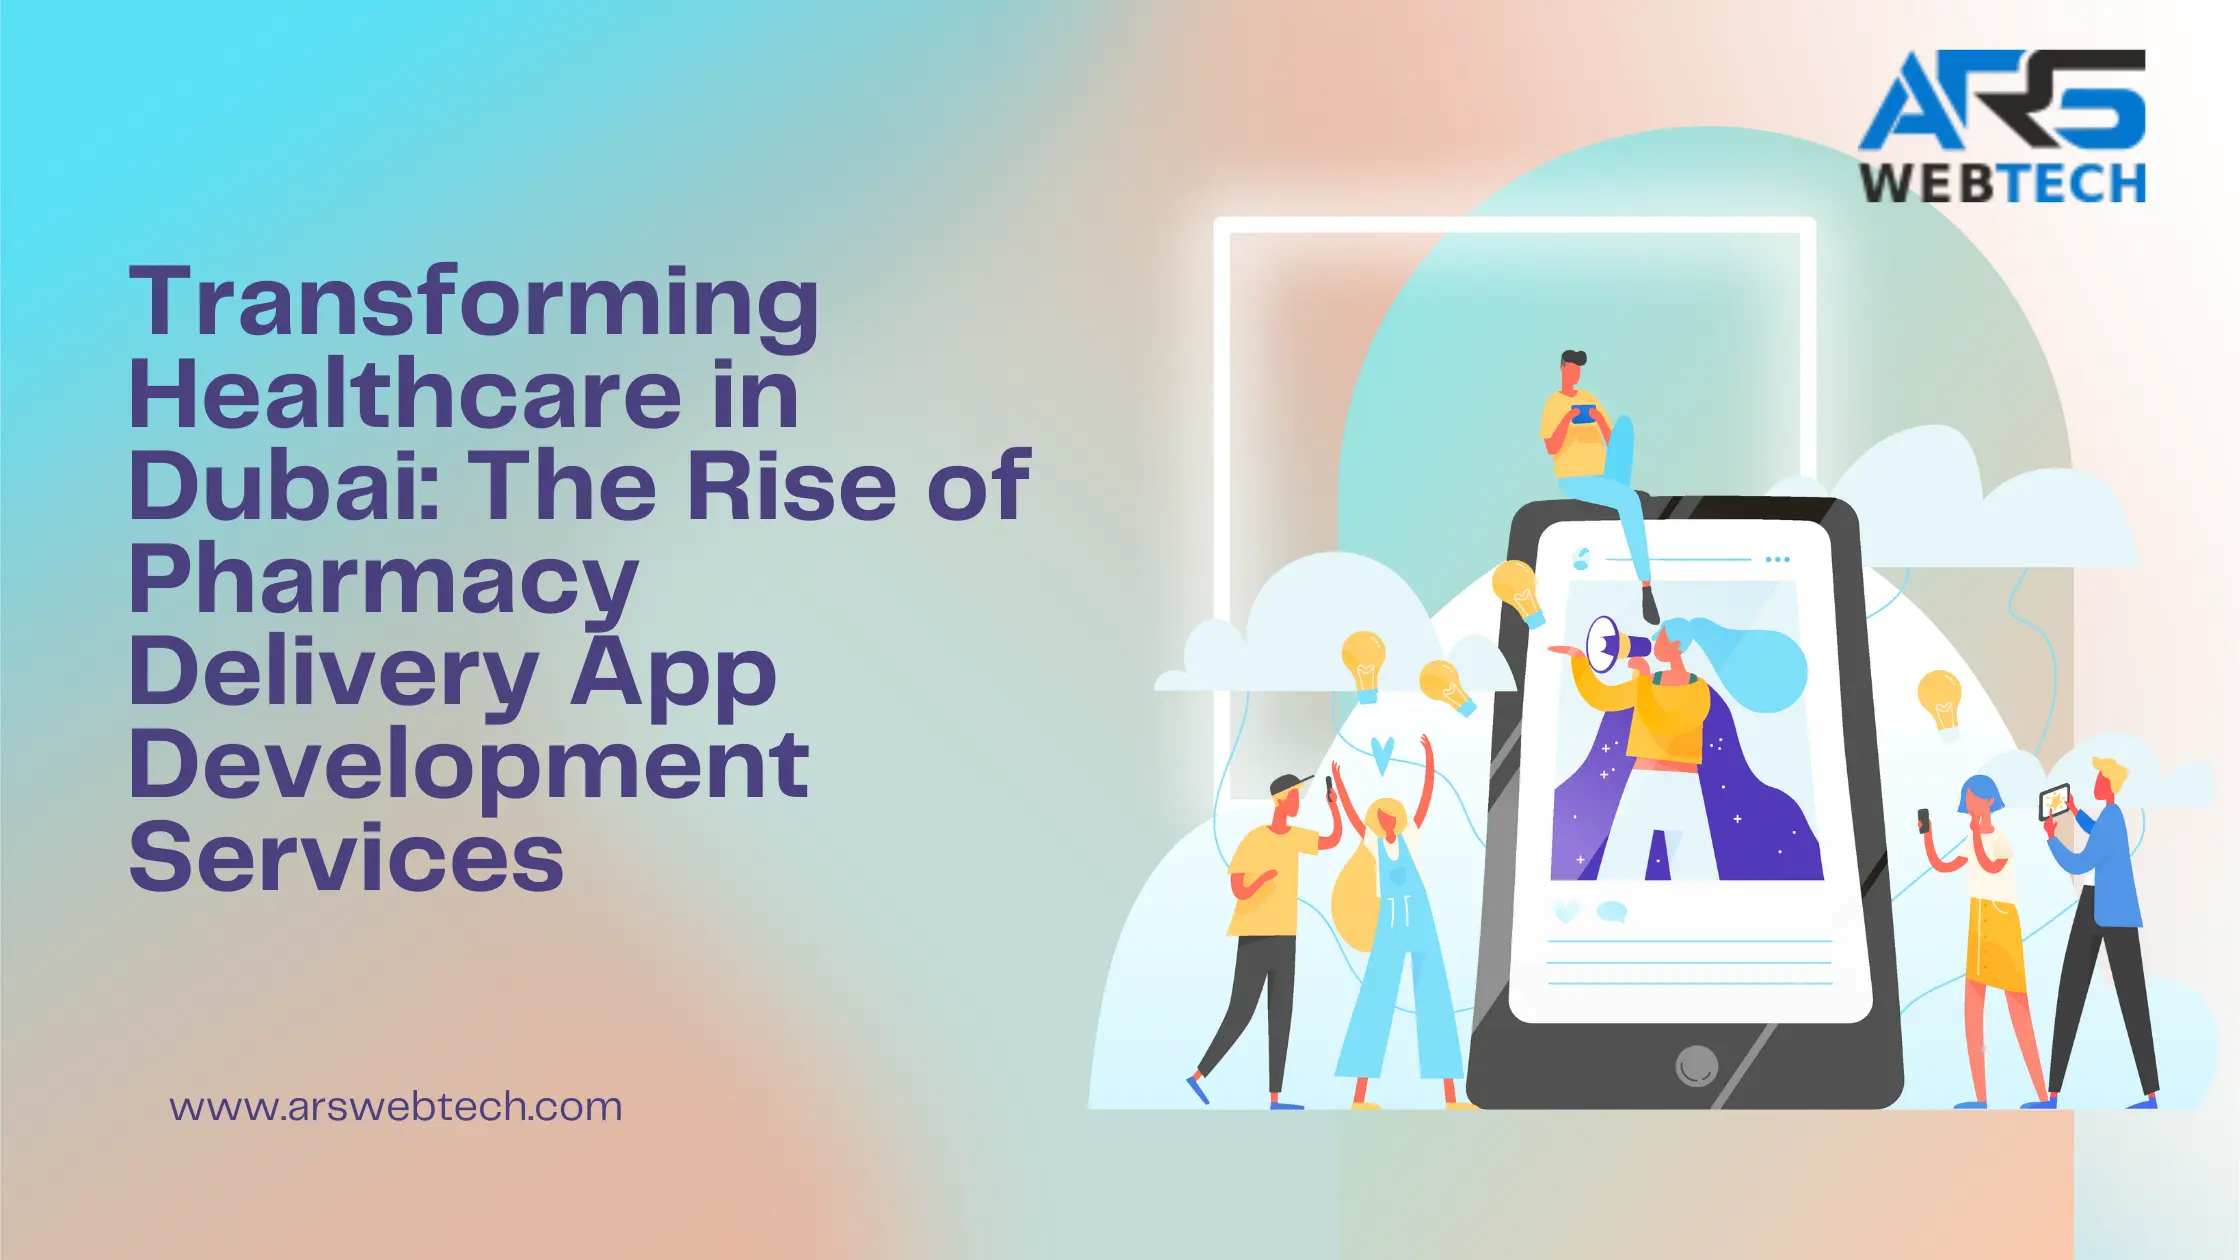 Transforming Healthcare in Dubai: The Rise of Pharmacy Delivery App Development Services